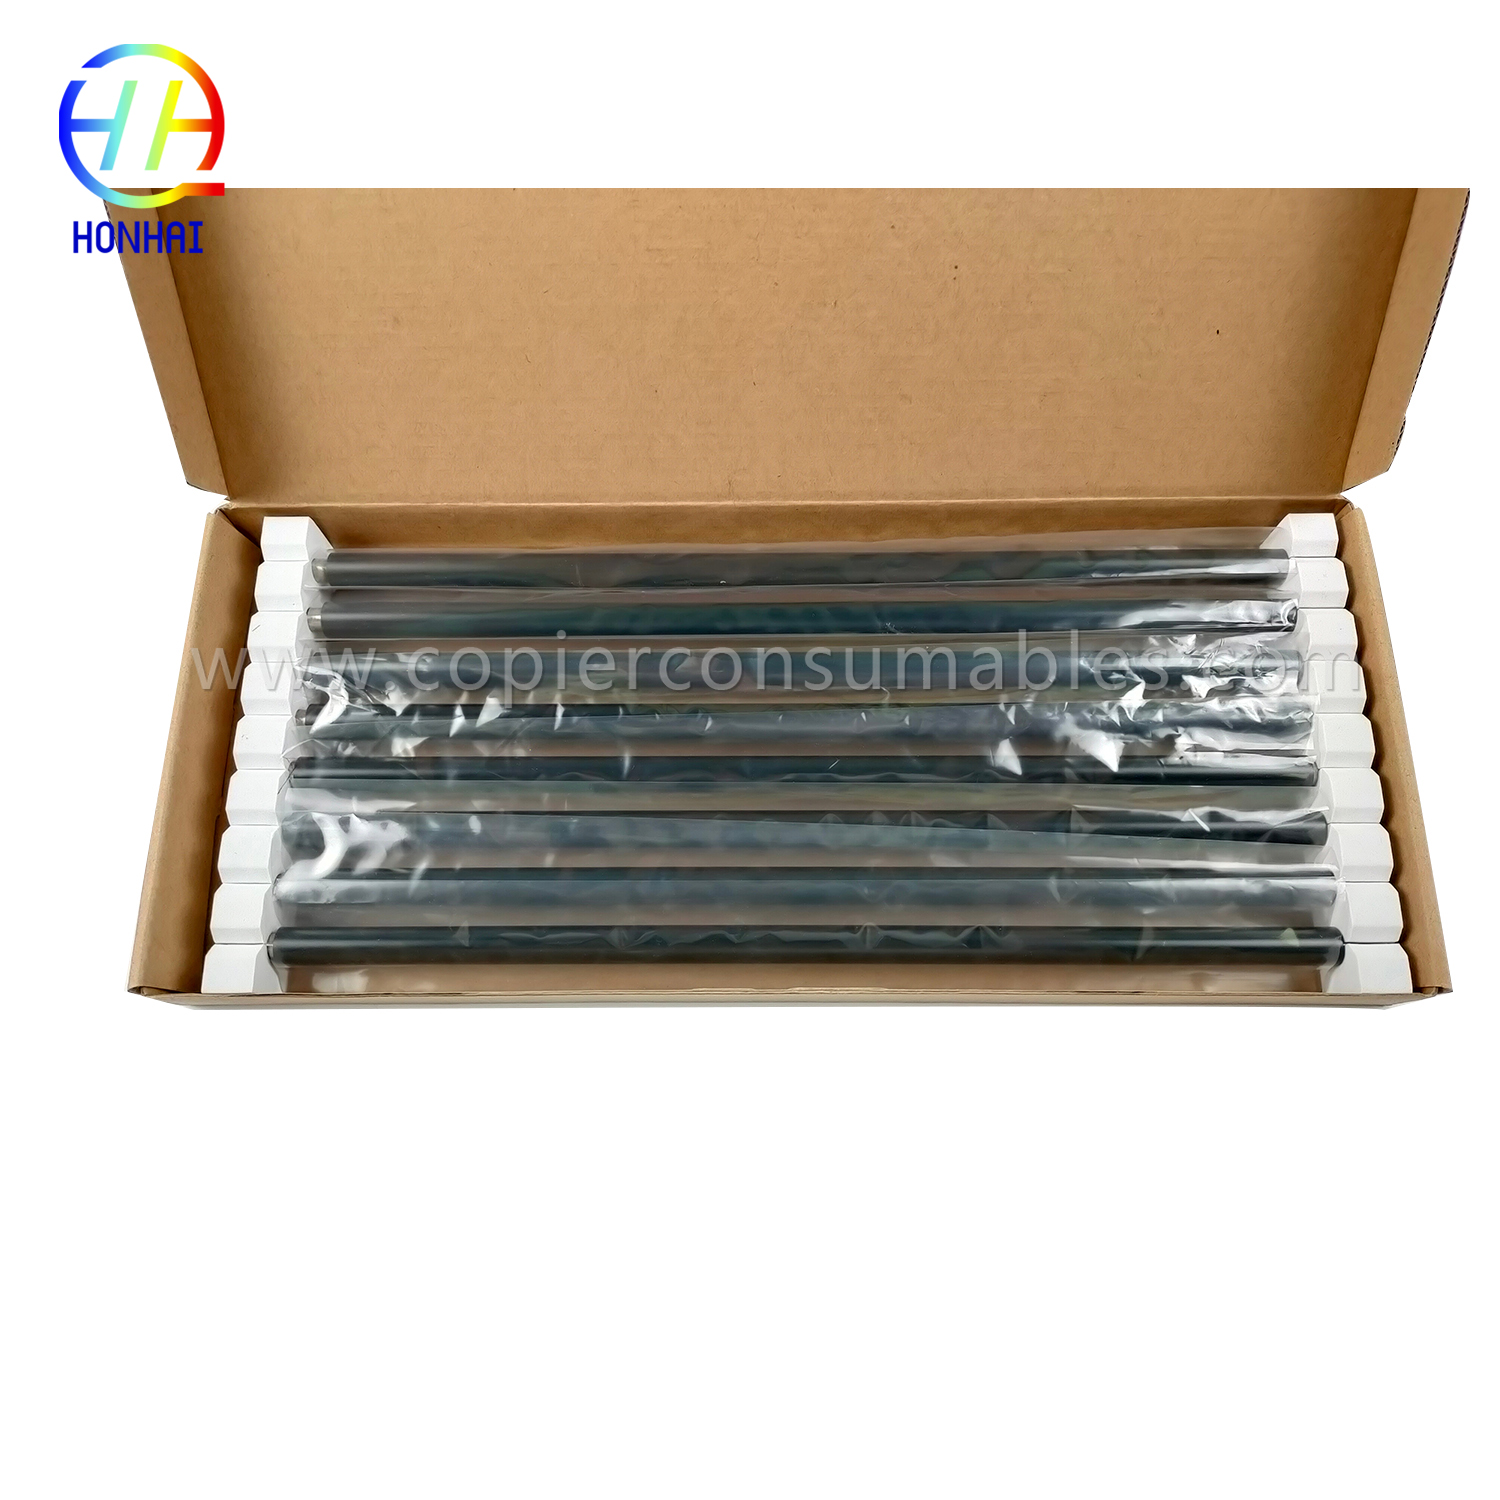 Transfer Roller for Samsung Ml-3051n 3051ND 3470d 3471ND (JC97-02652A)  (3)